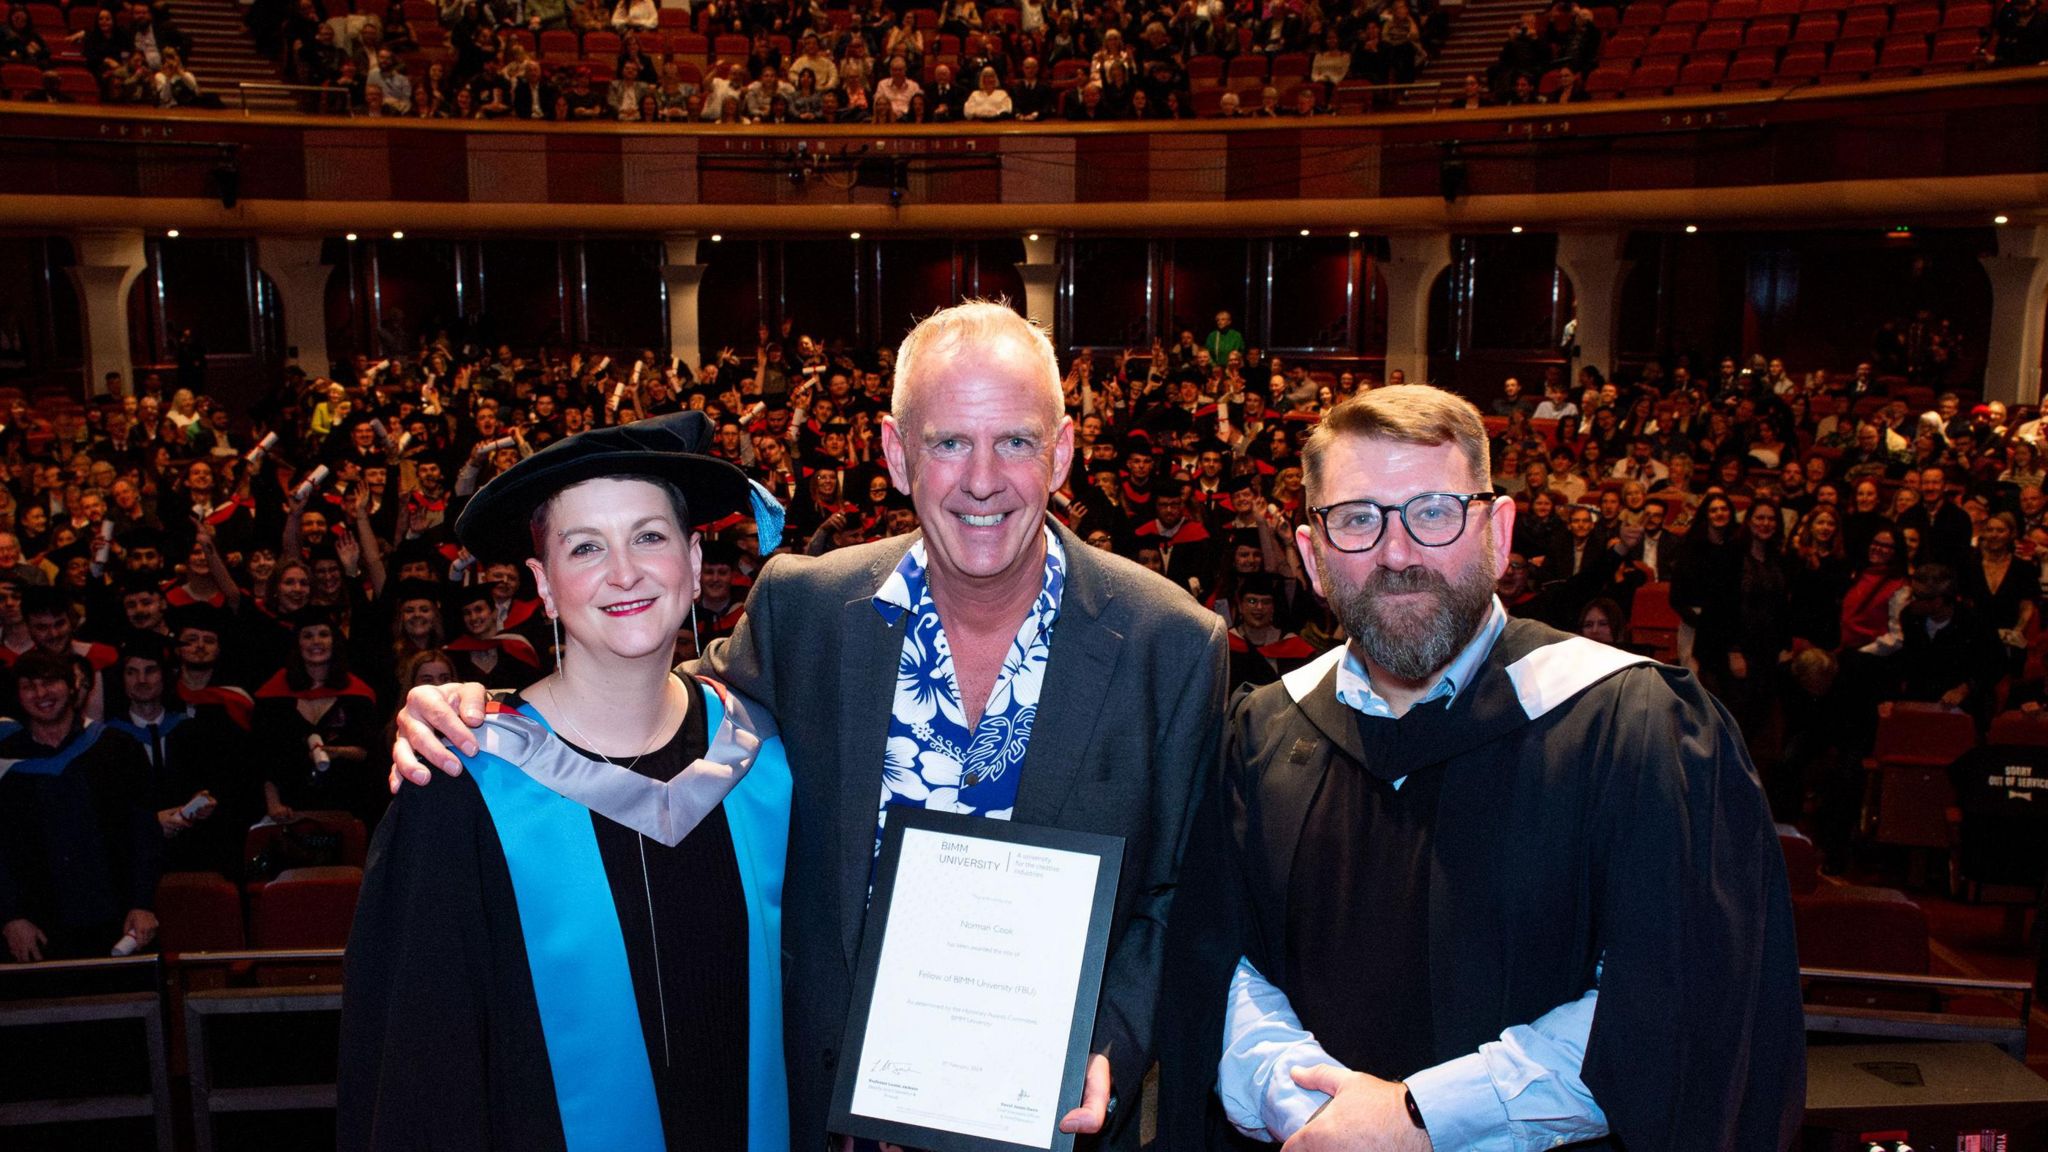 Fatboy Slim on stage after accepting his honorary fellowship